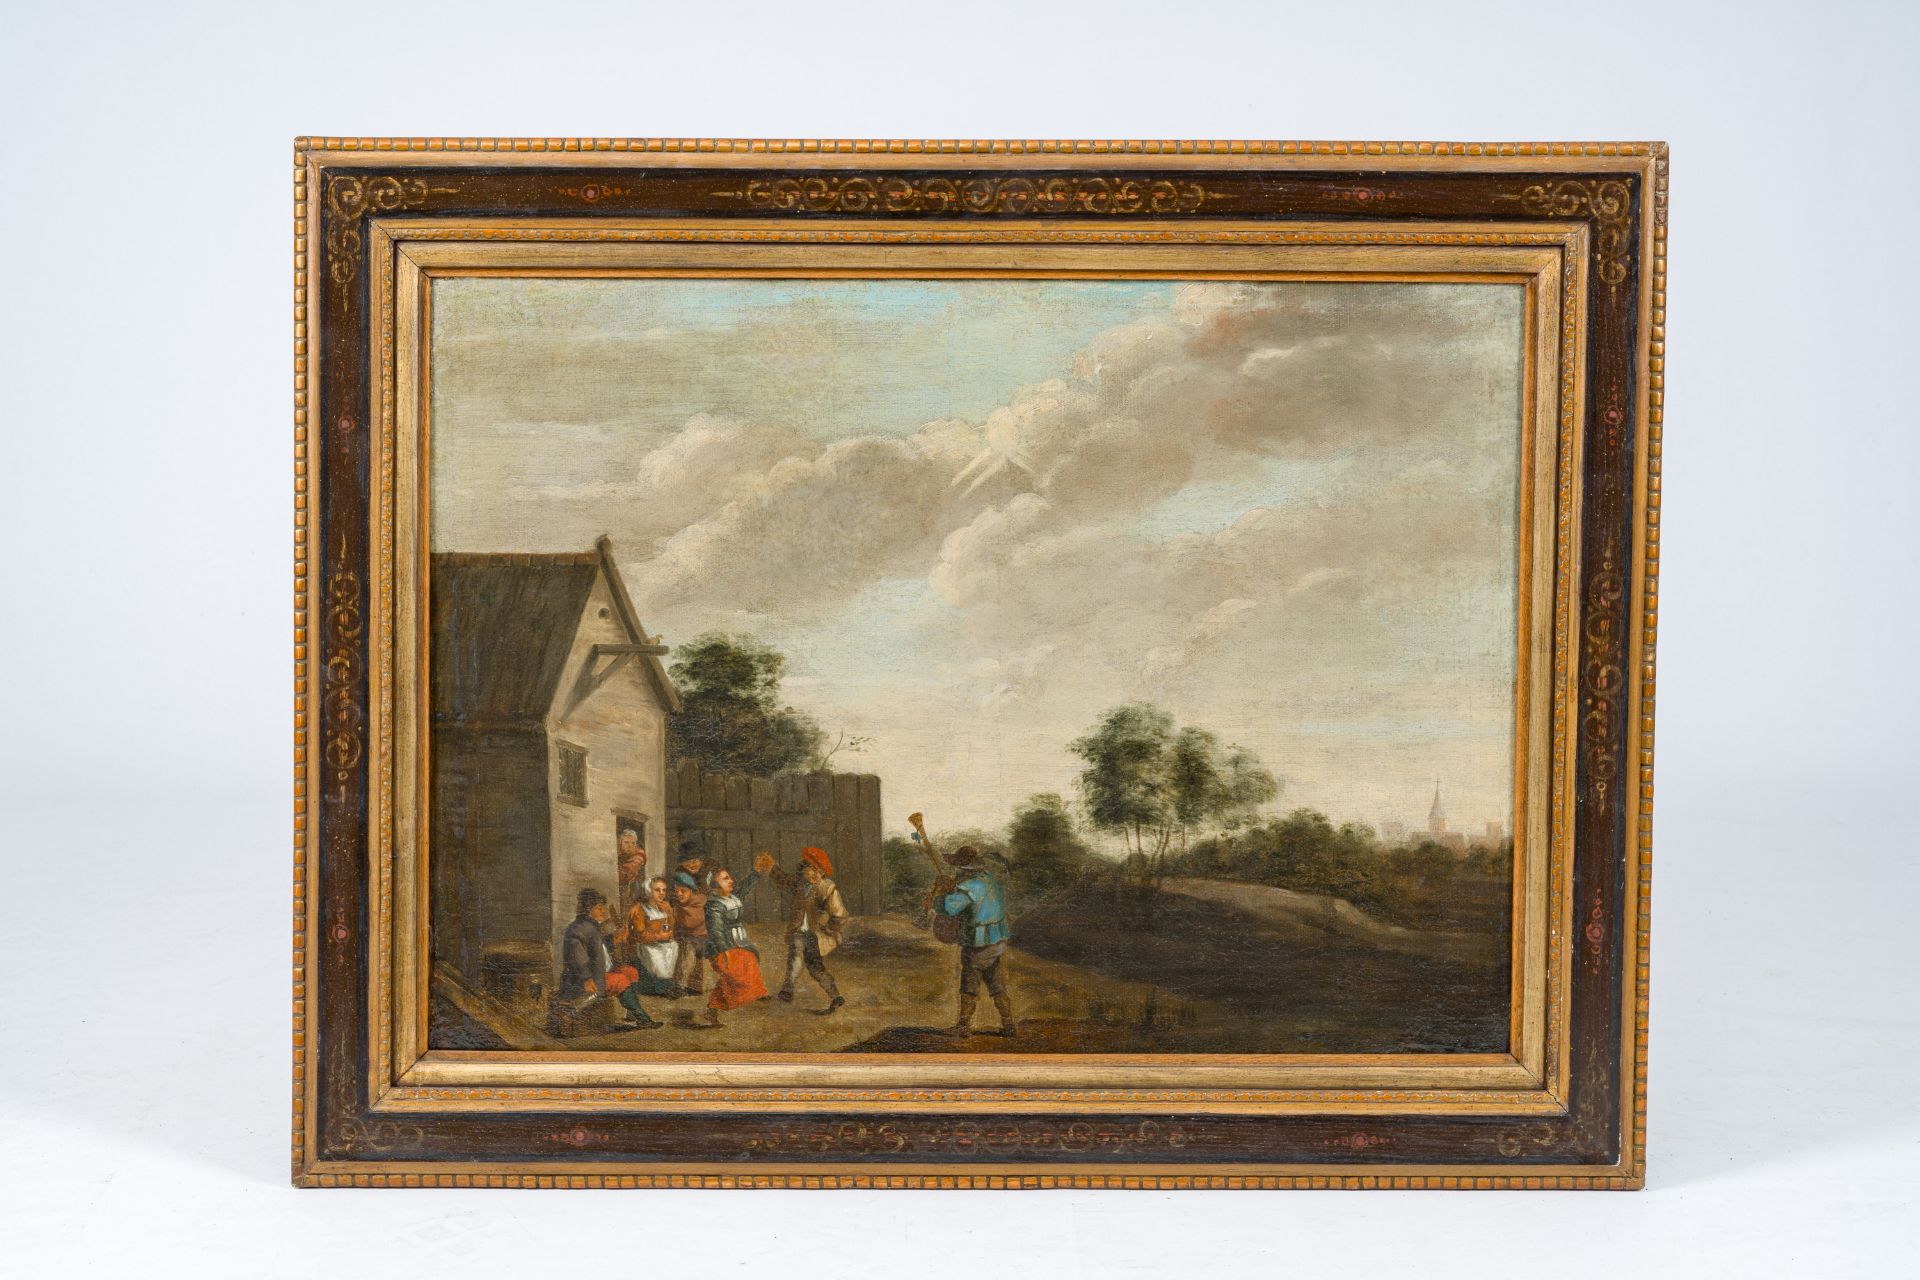 Flemish school: Peasants making merry at an inn, oil on canvas, first half 18th C. - Image 2 of 3